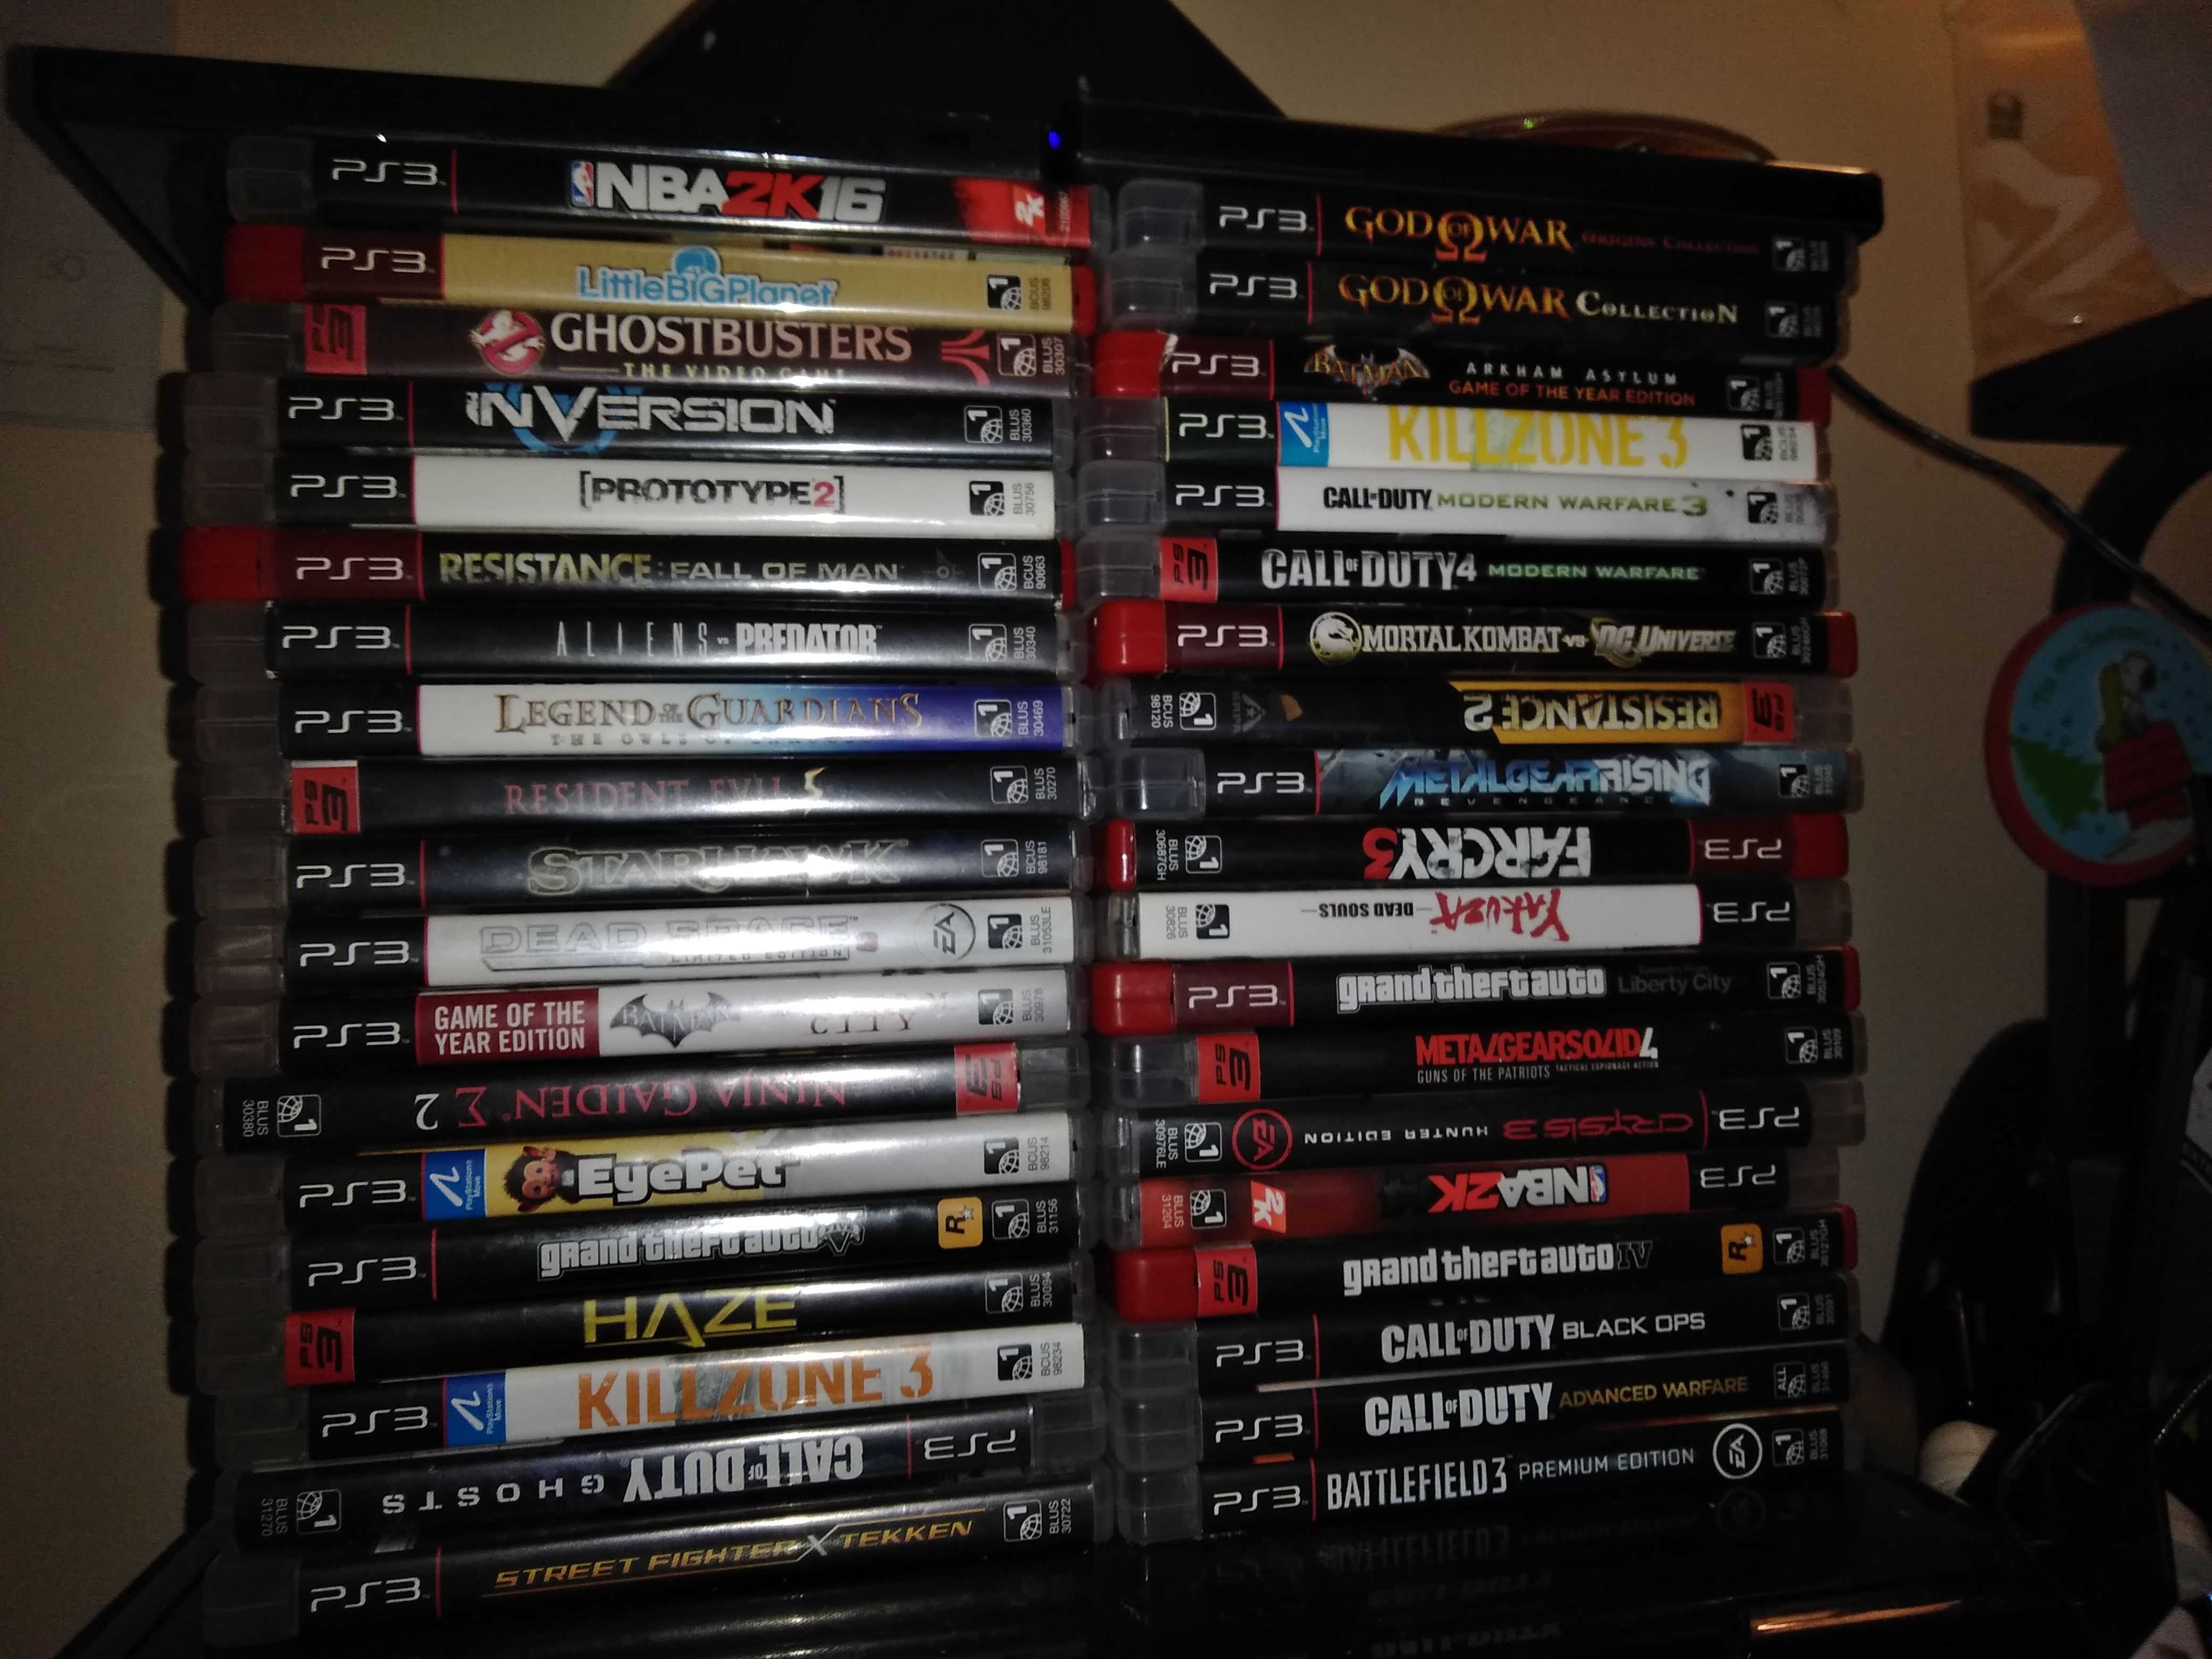 55games ps3 and 9inch tablet Polaroid